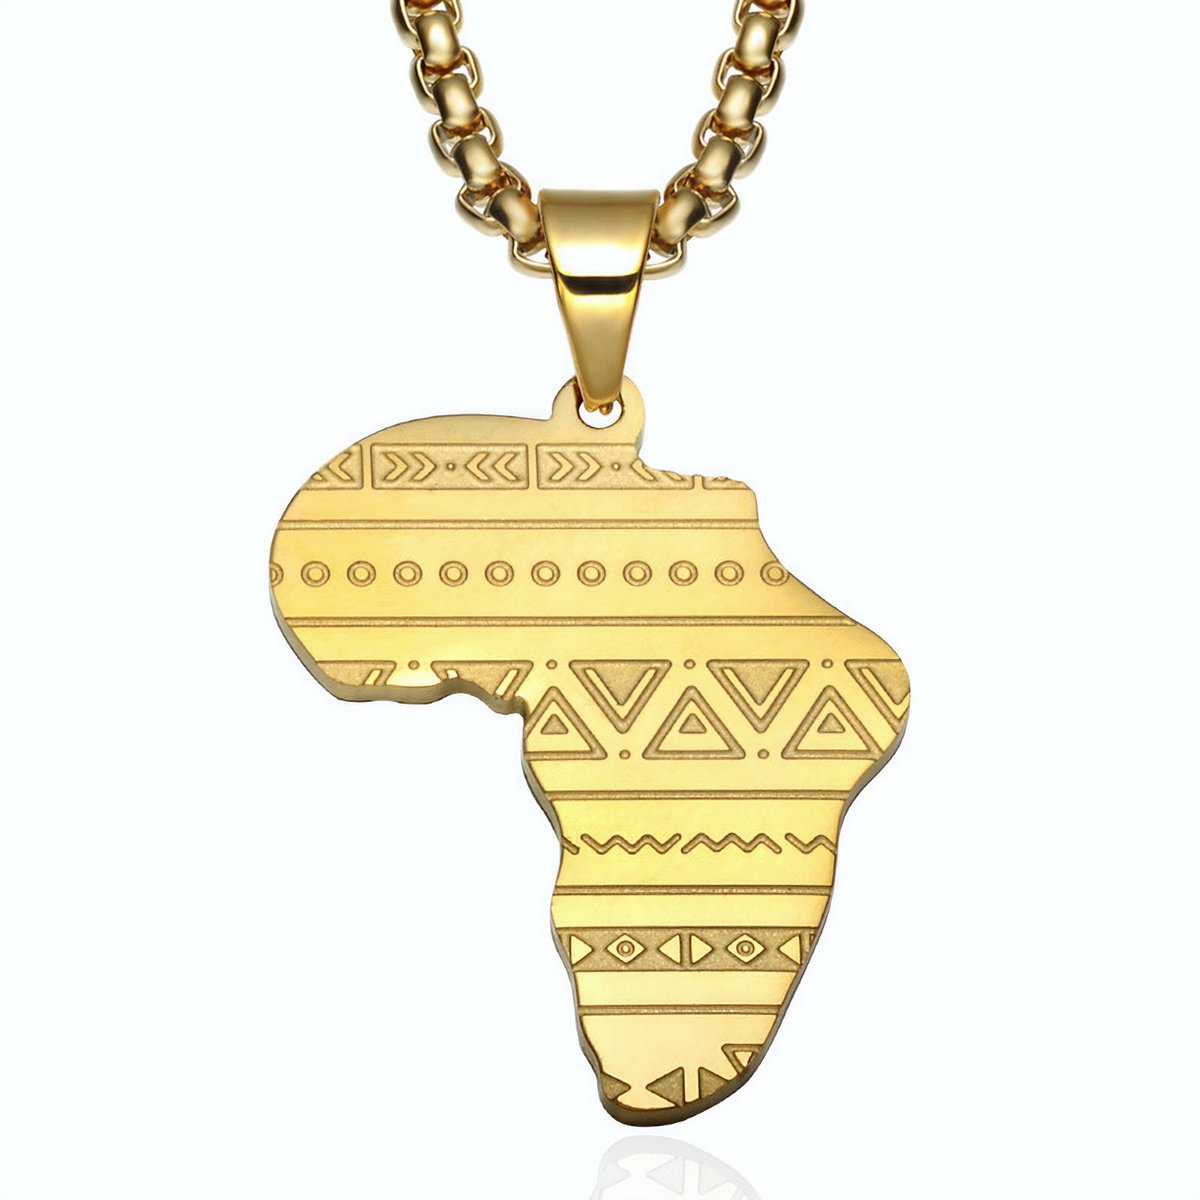 ICYBOY 18K Afrikaans Ketting met Afrika Map Pendant Verguld Goud [GOLD-PLATED] [ICED OUT] [24 INCH - 60CM] - Gold Plating African Punk Style Africa Map Necklace